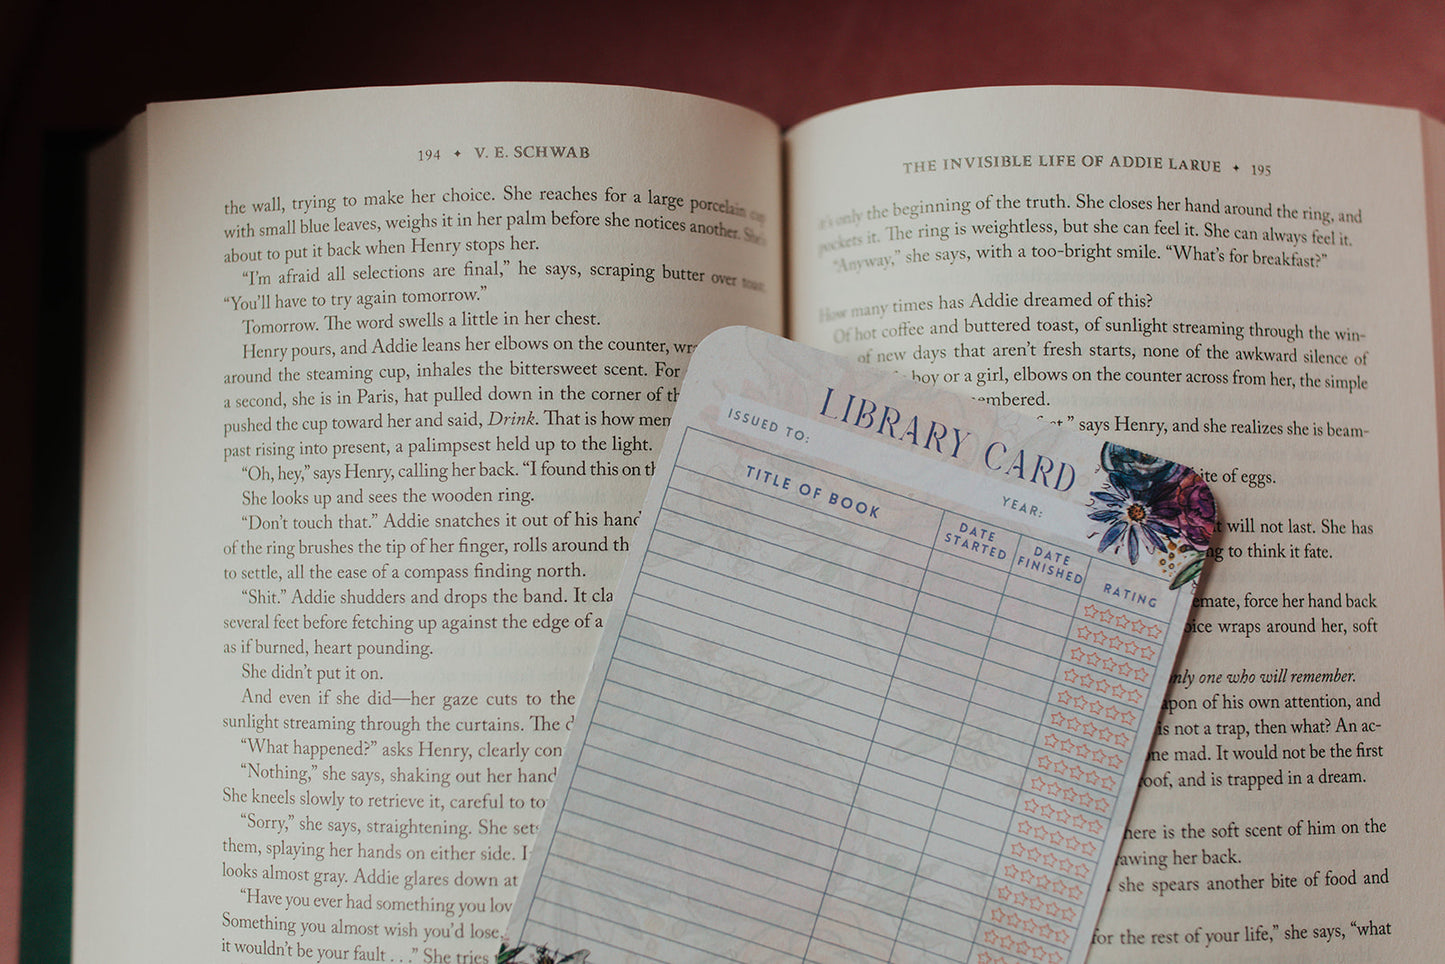 Watercolor Library Card Bookmark